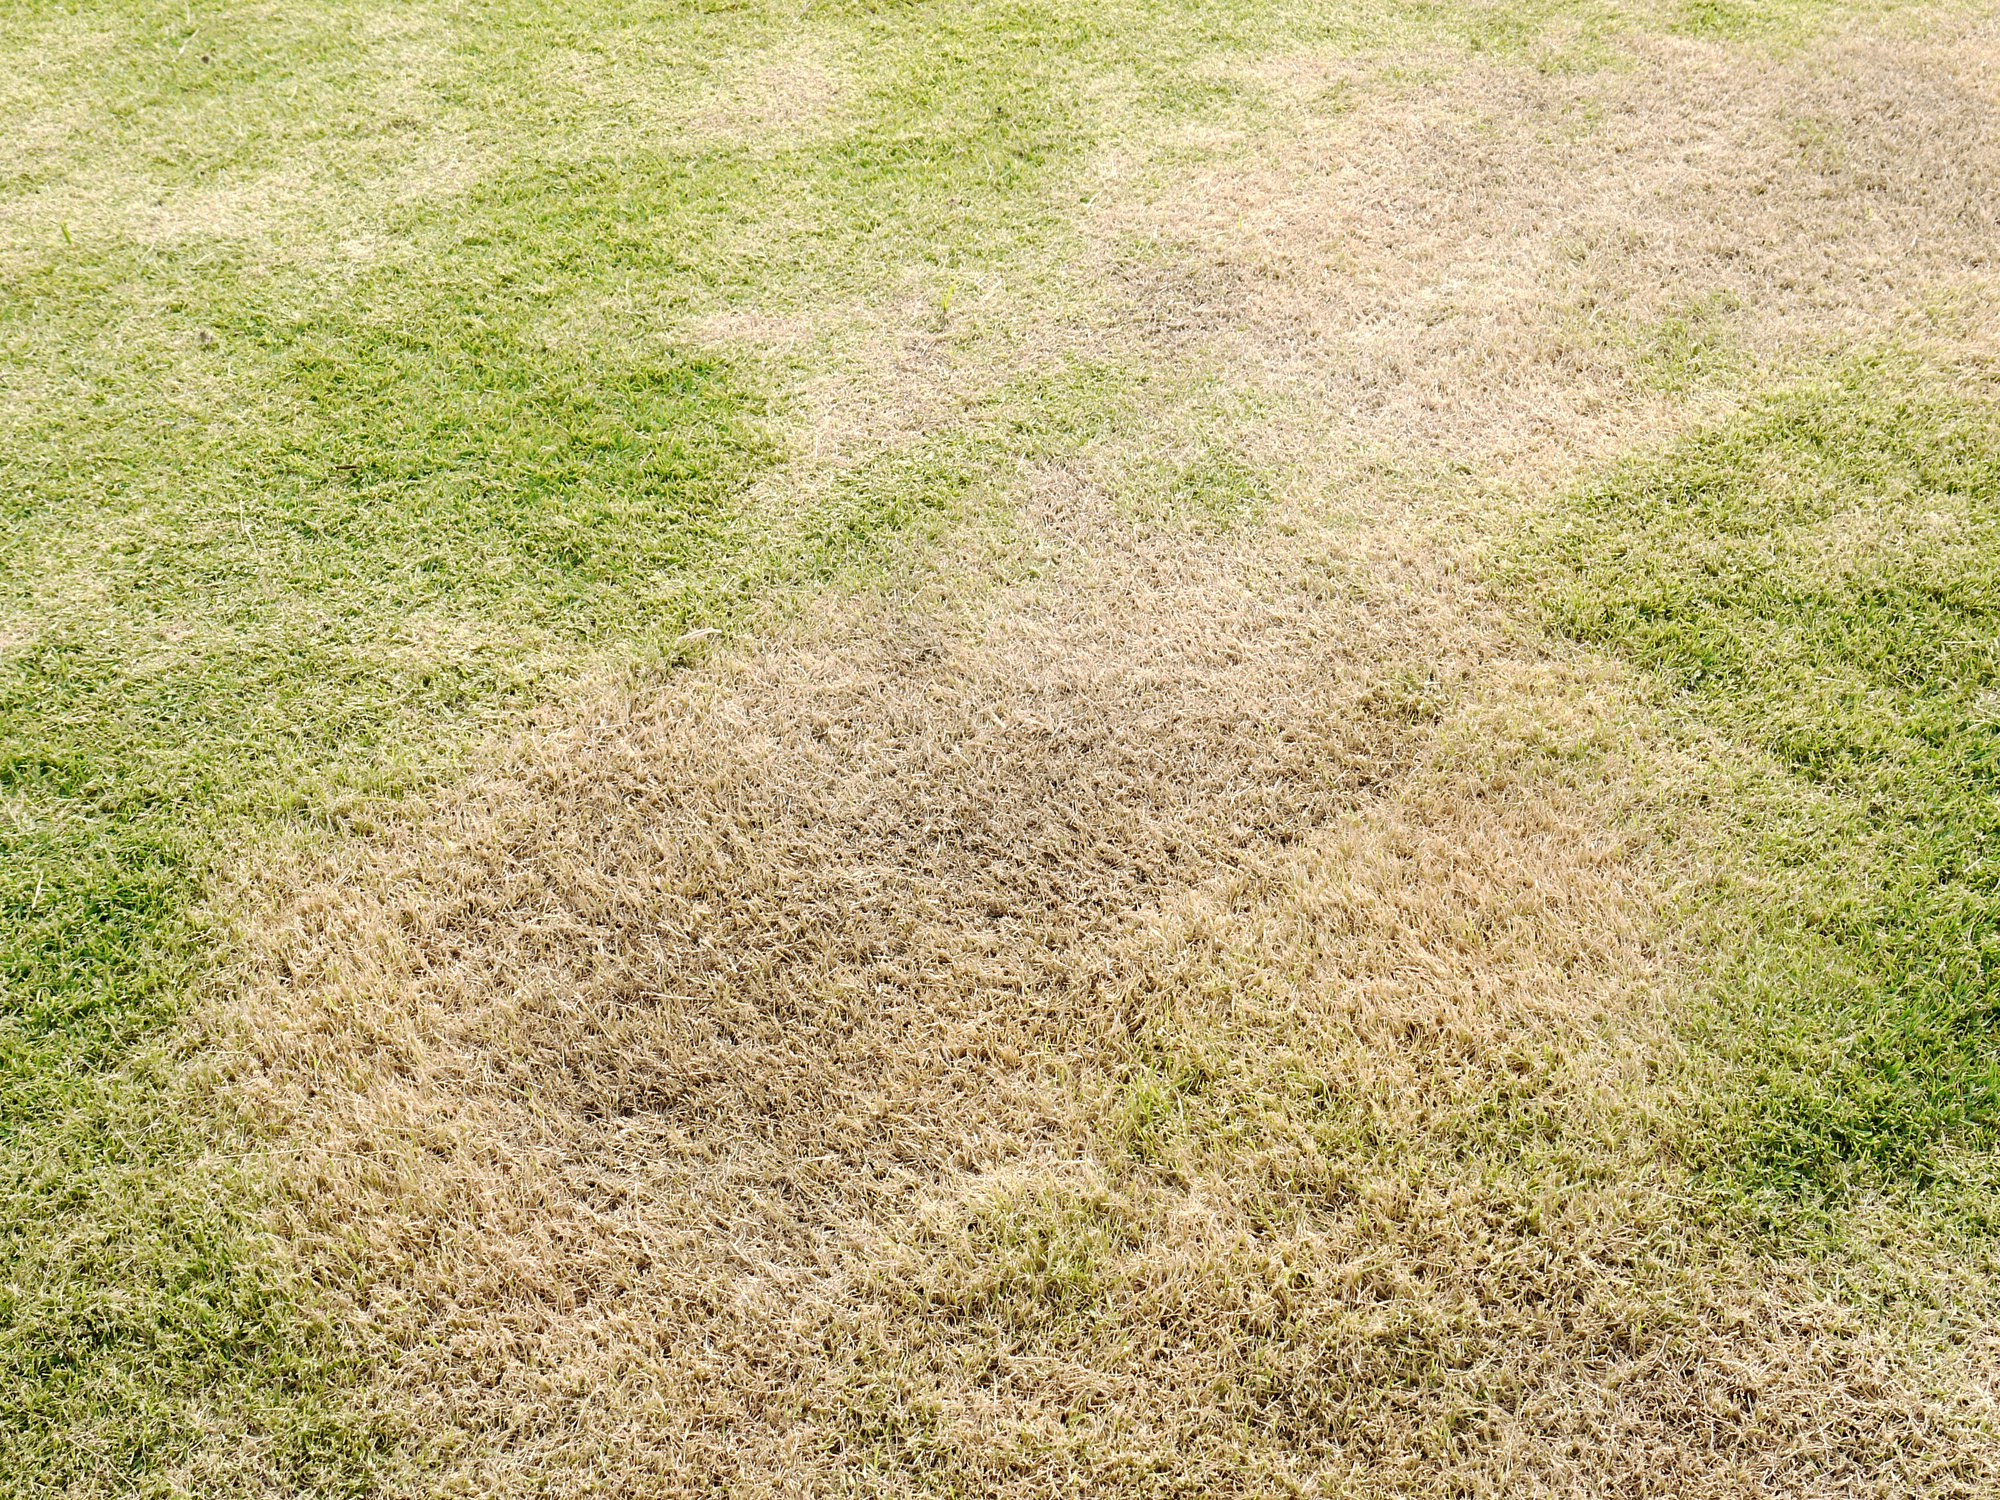 6 Common Lawn Care Mistakes and How to Avoid Them